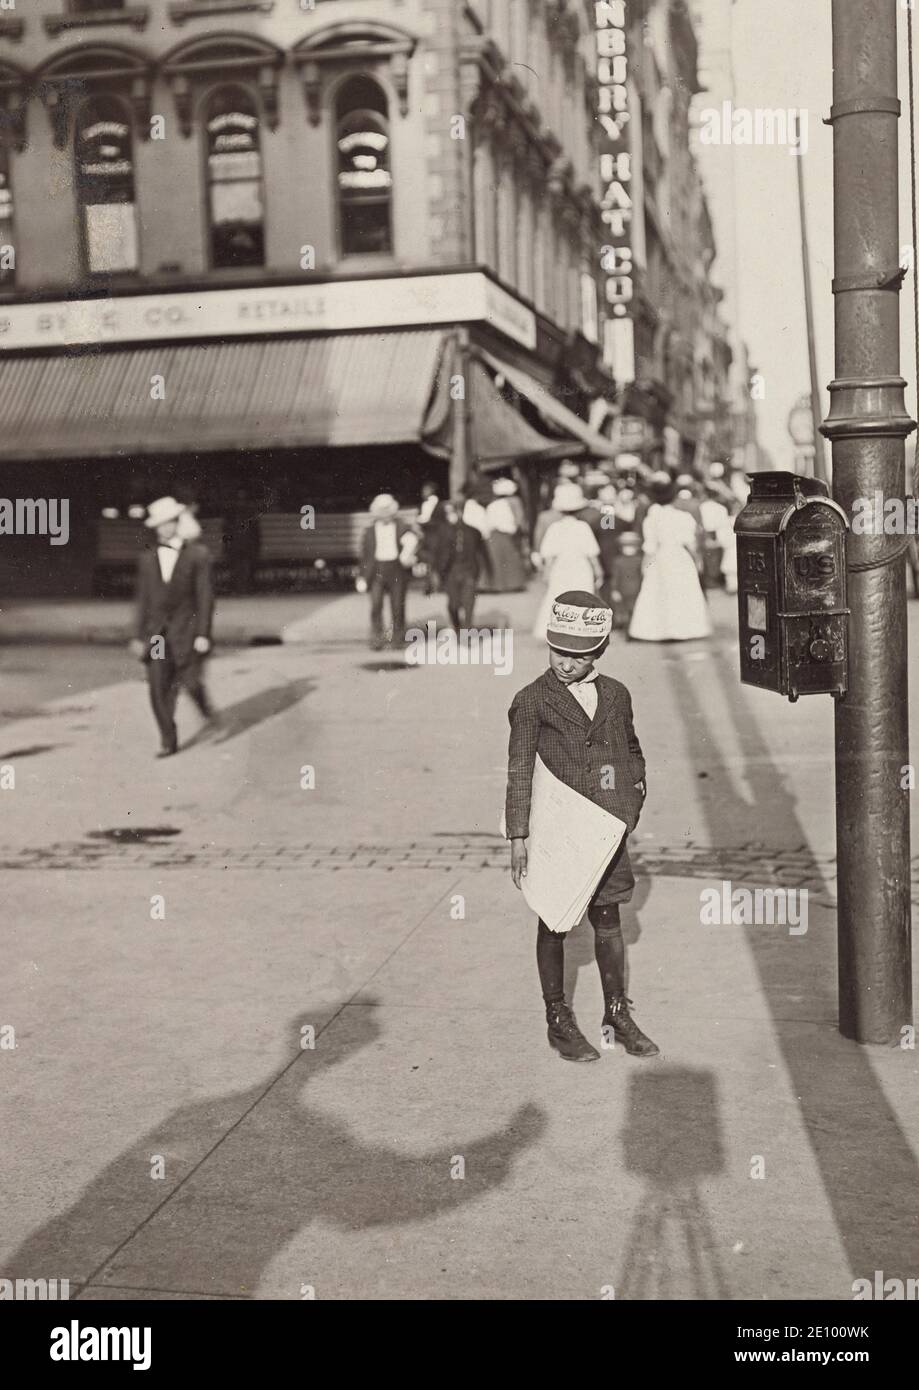 Lewis Hine - Newsboy on a Street Corner In Indianapolis, Indiana, USA - 1908 Stock Photo